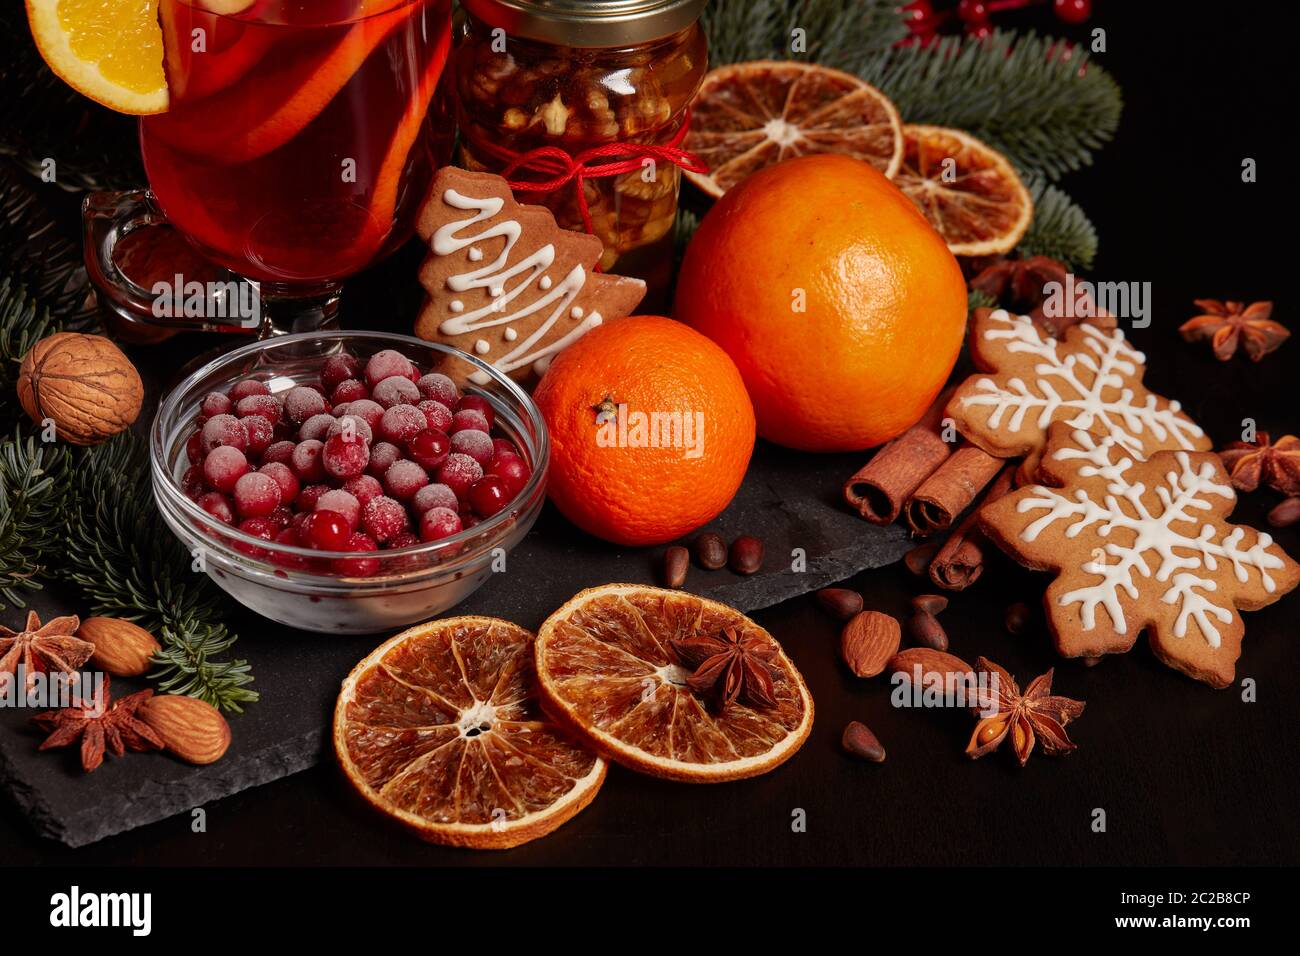 Still life with glasses of mulled wine or fruit tea, Red Poinsettia flowers, fir branch and spices on a dark background. New year and Christmas table Stock Photo